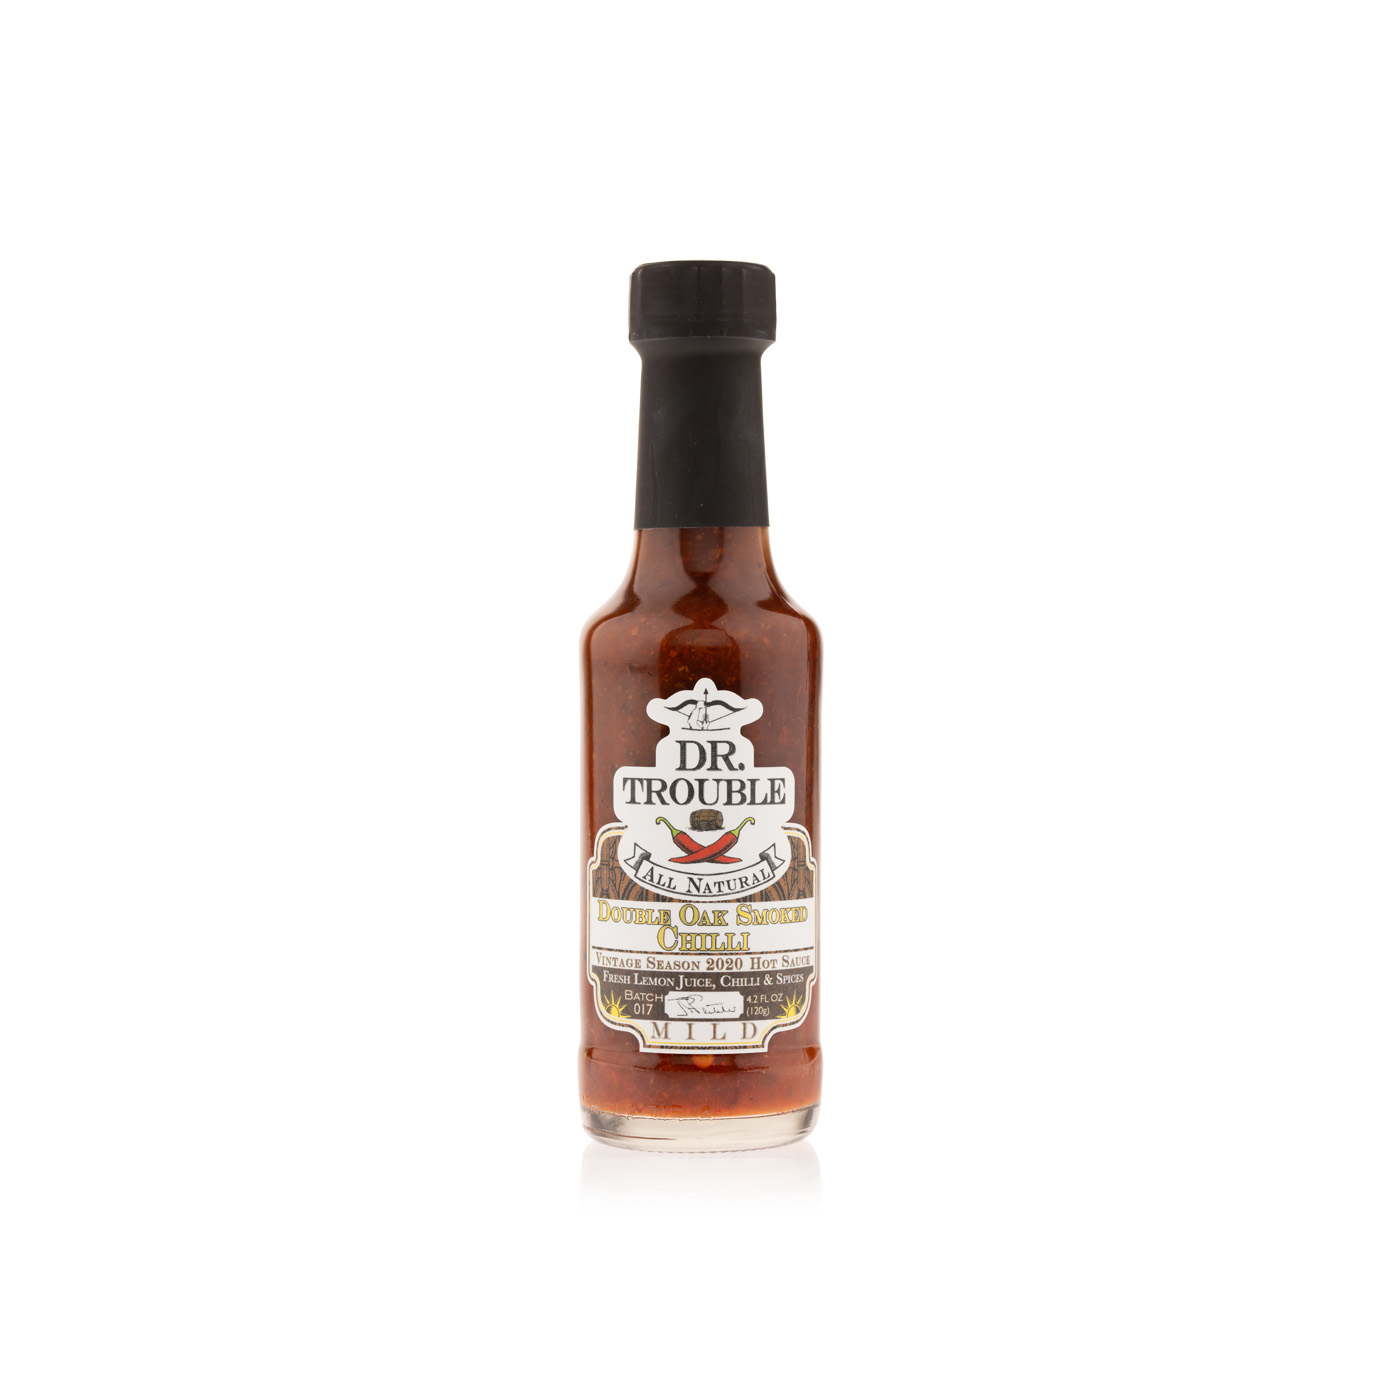 Dr Trouble double oak smoked hot chilli sauce 120g - Spinneys UAE